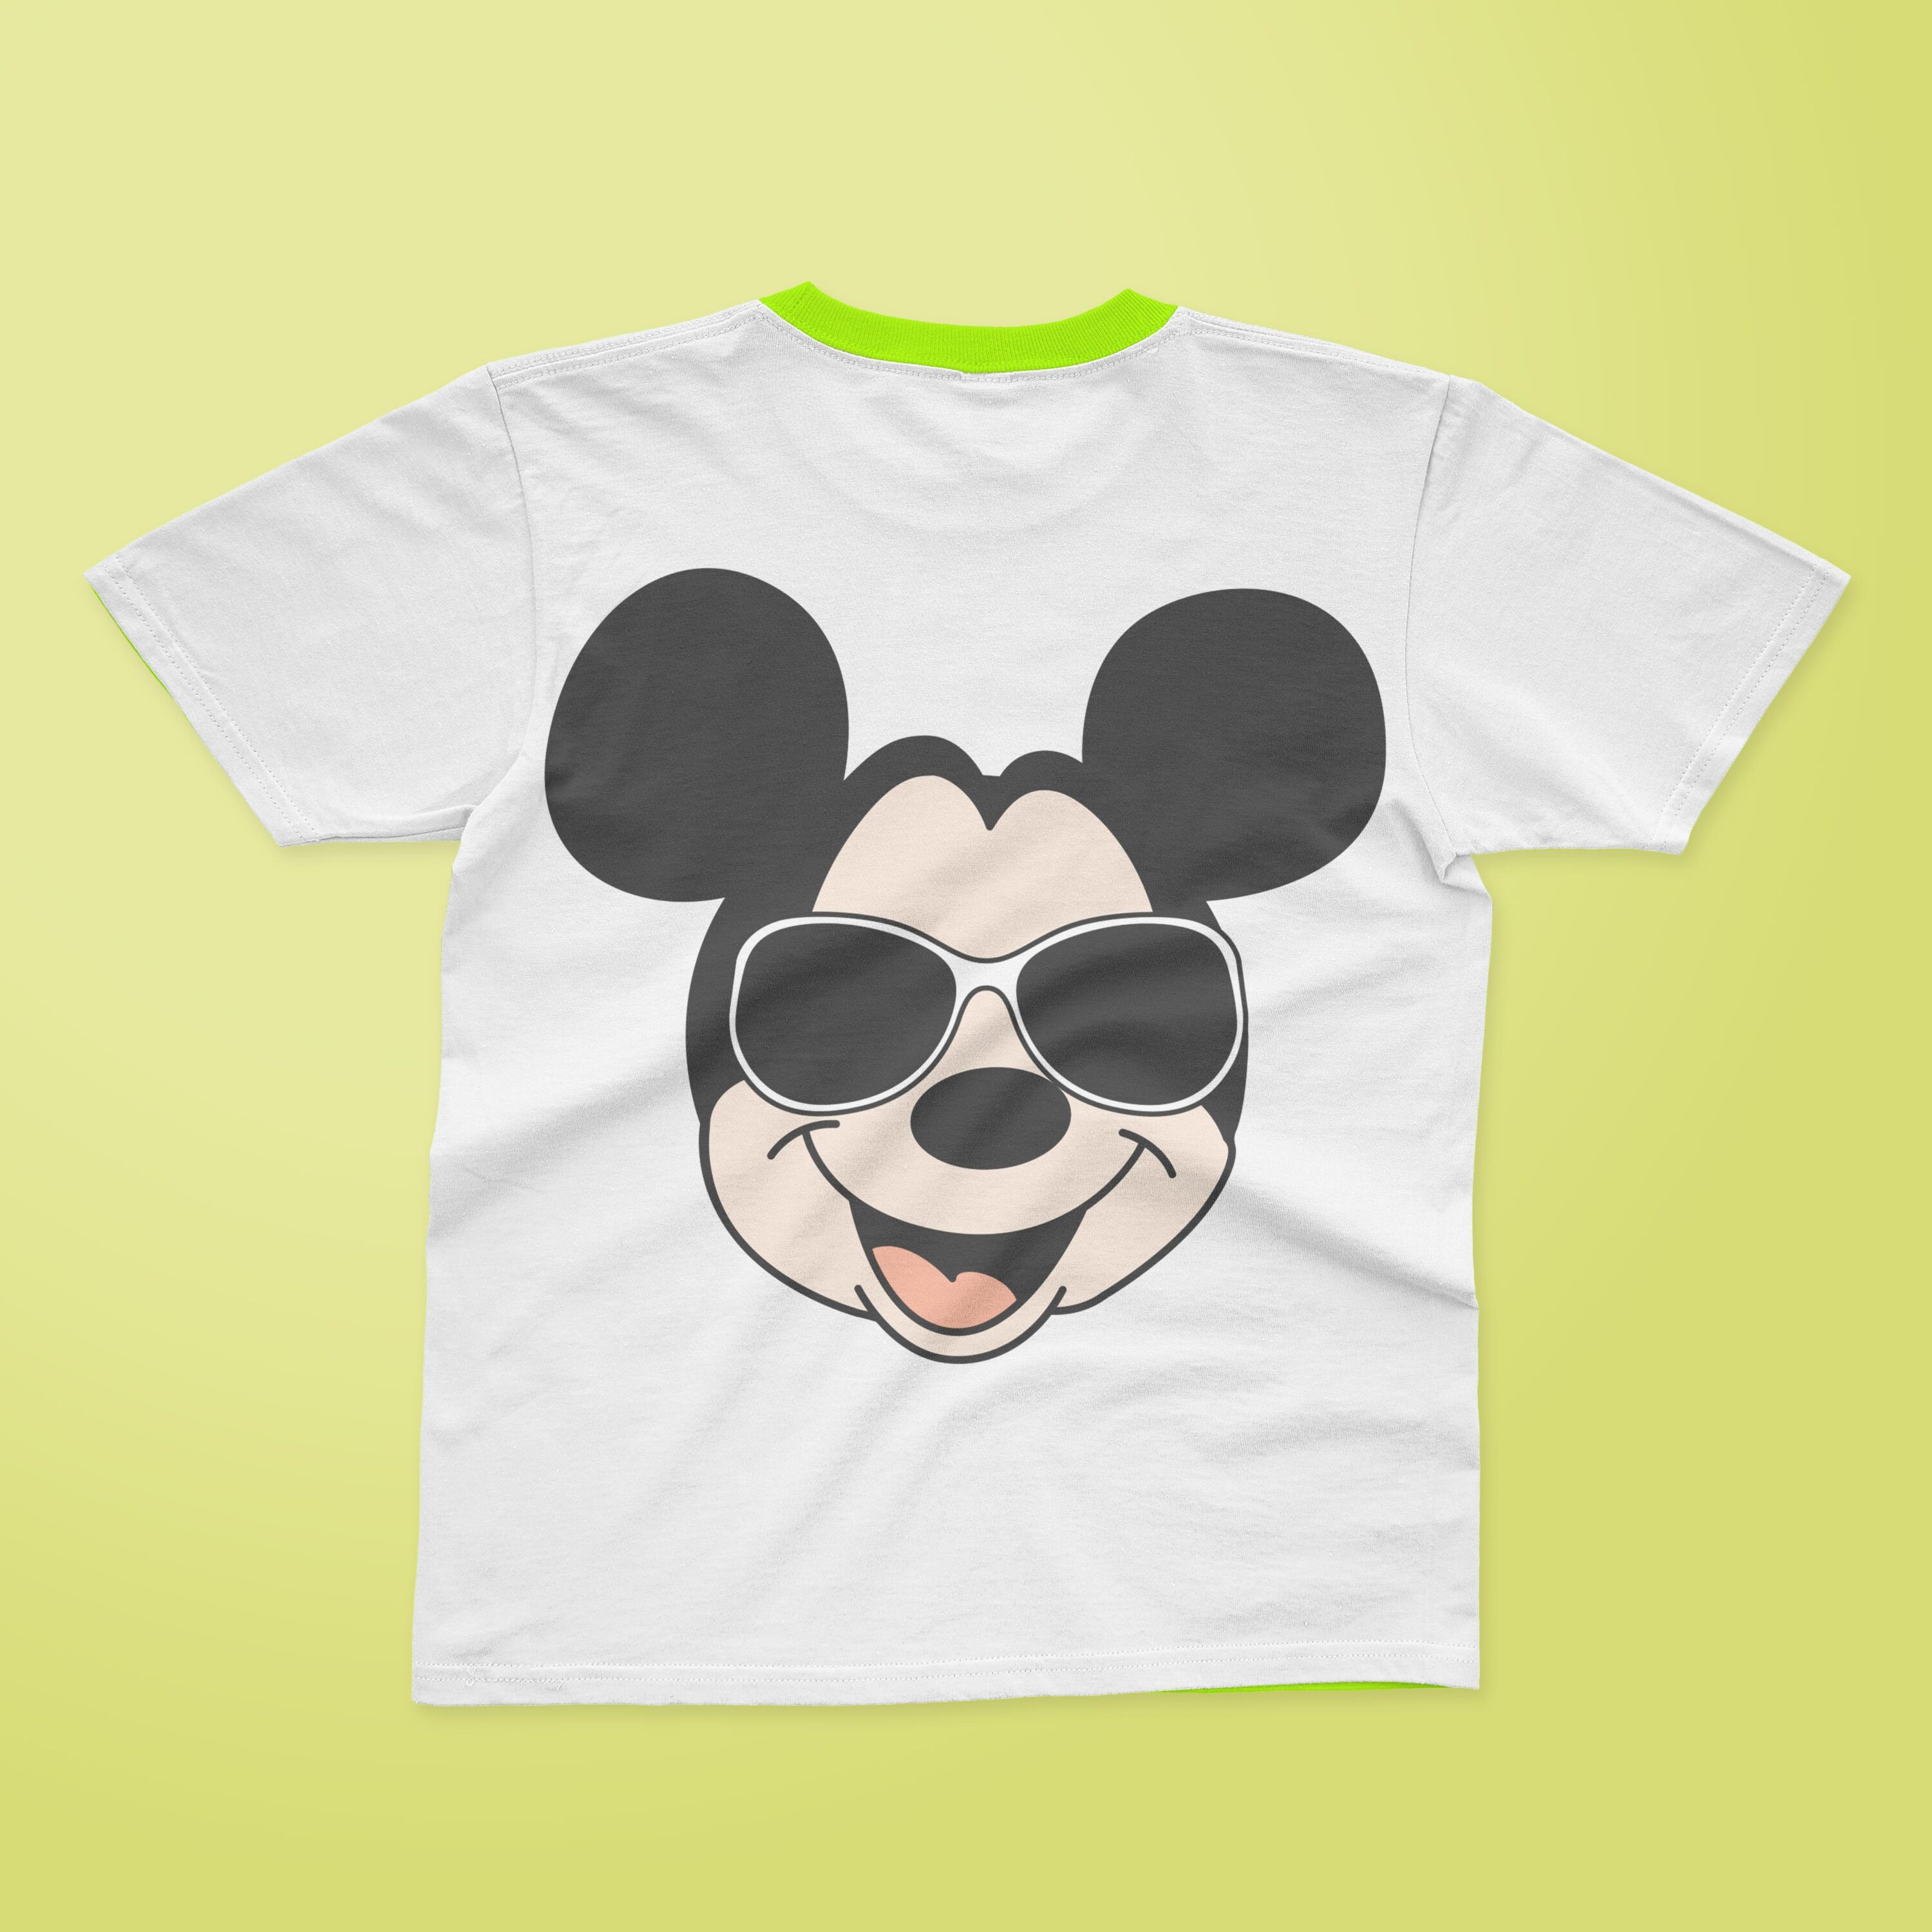 Cute t-shirt with mickey mouse with sunglasses.